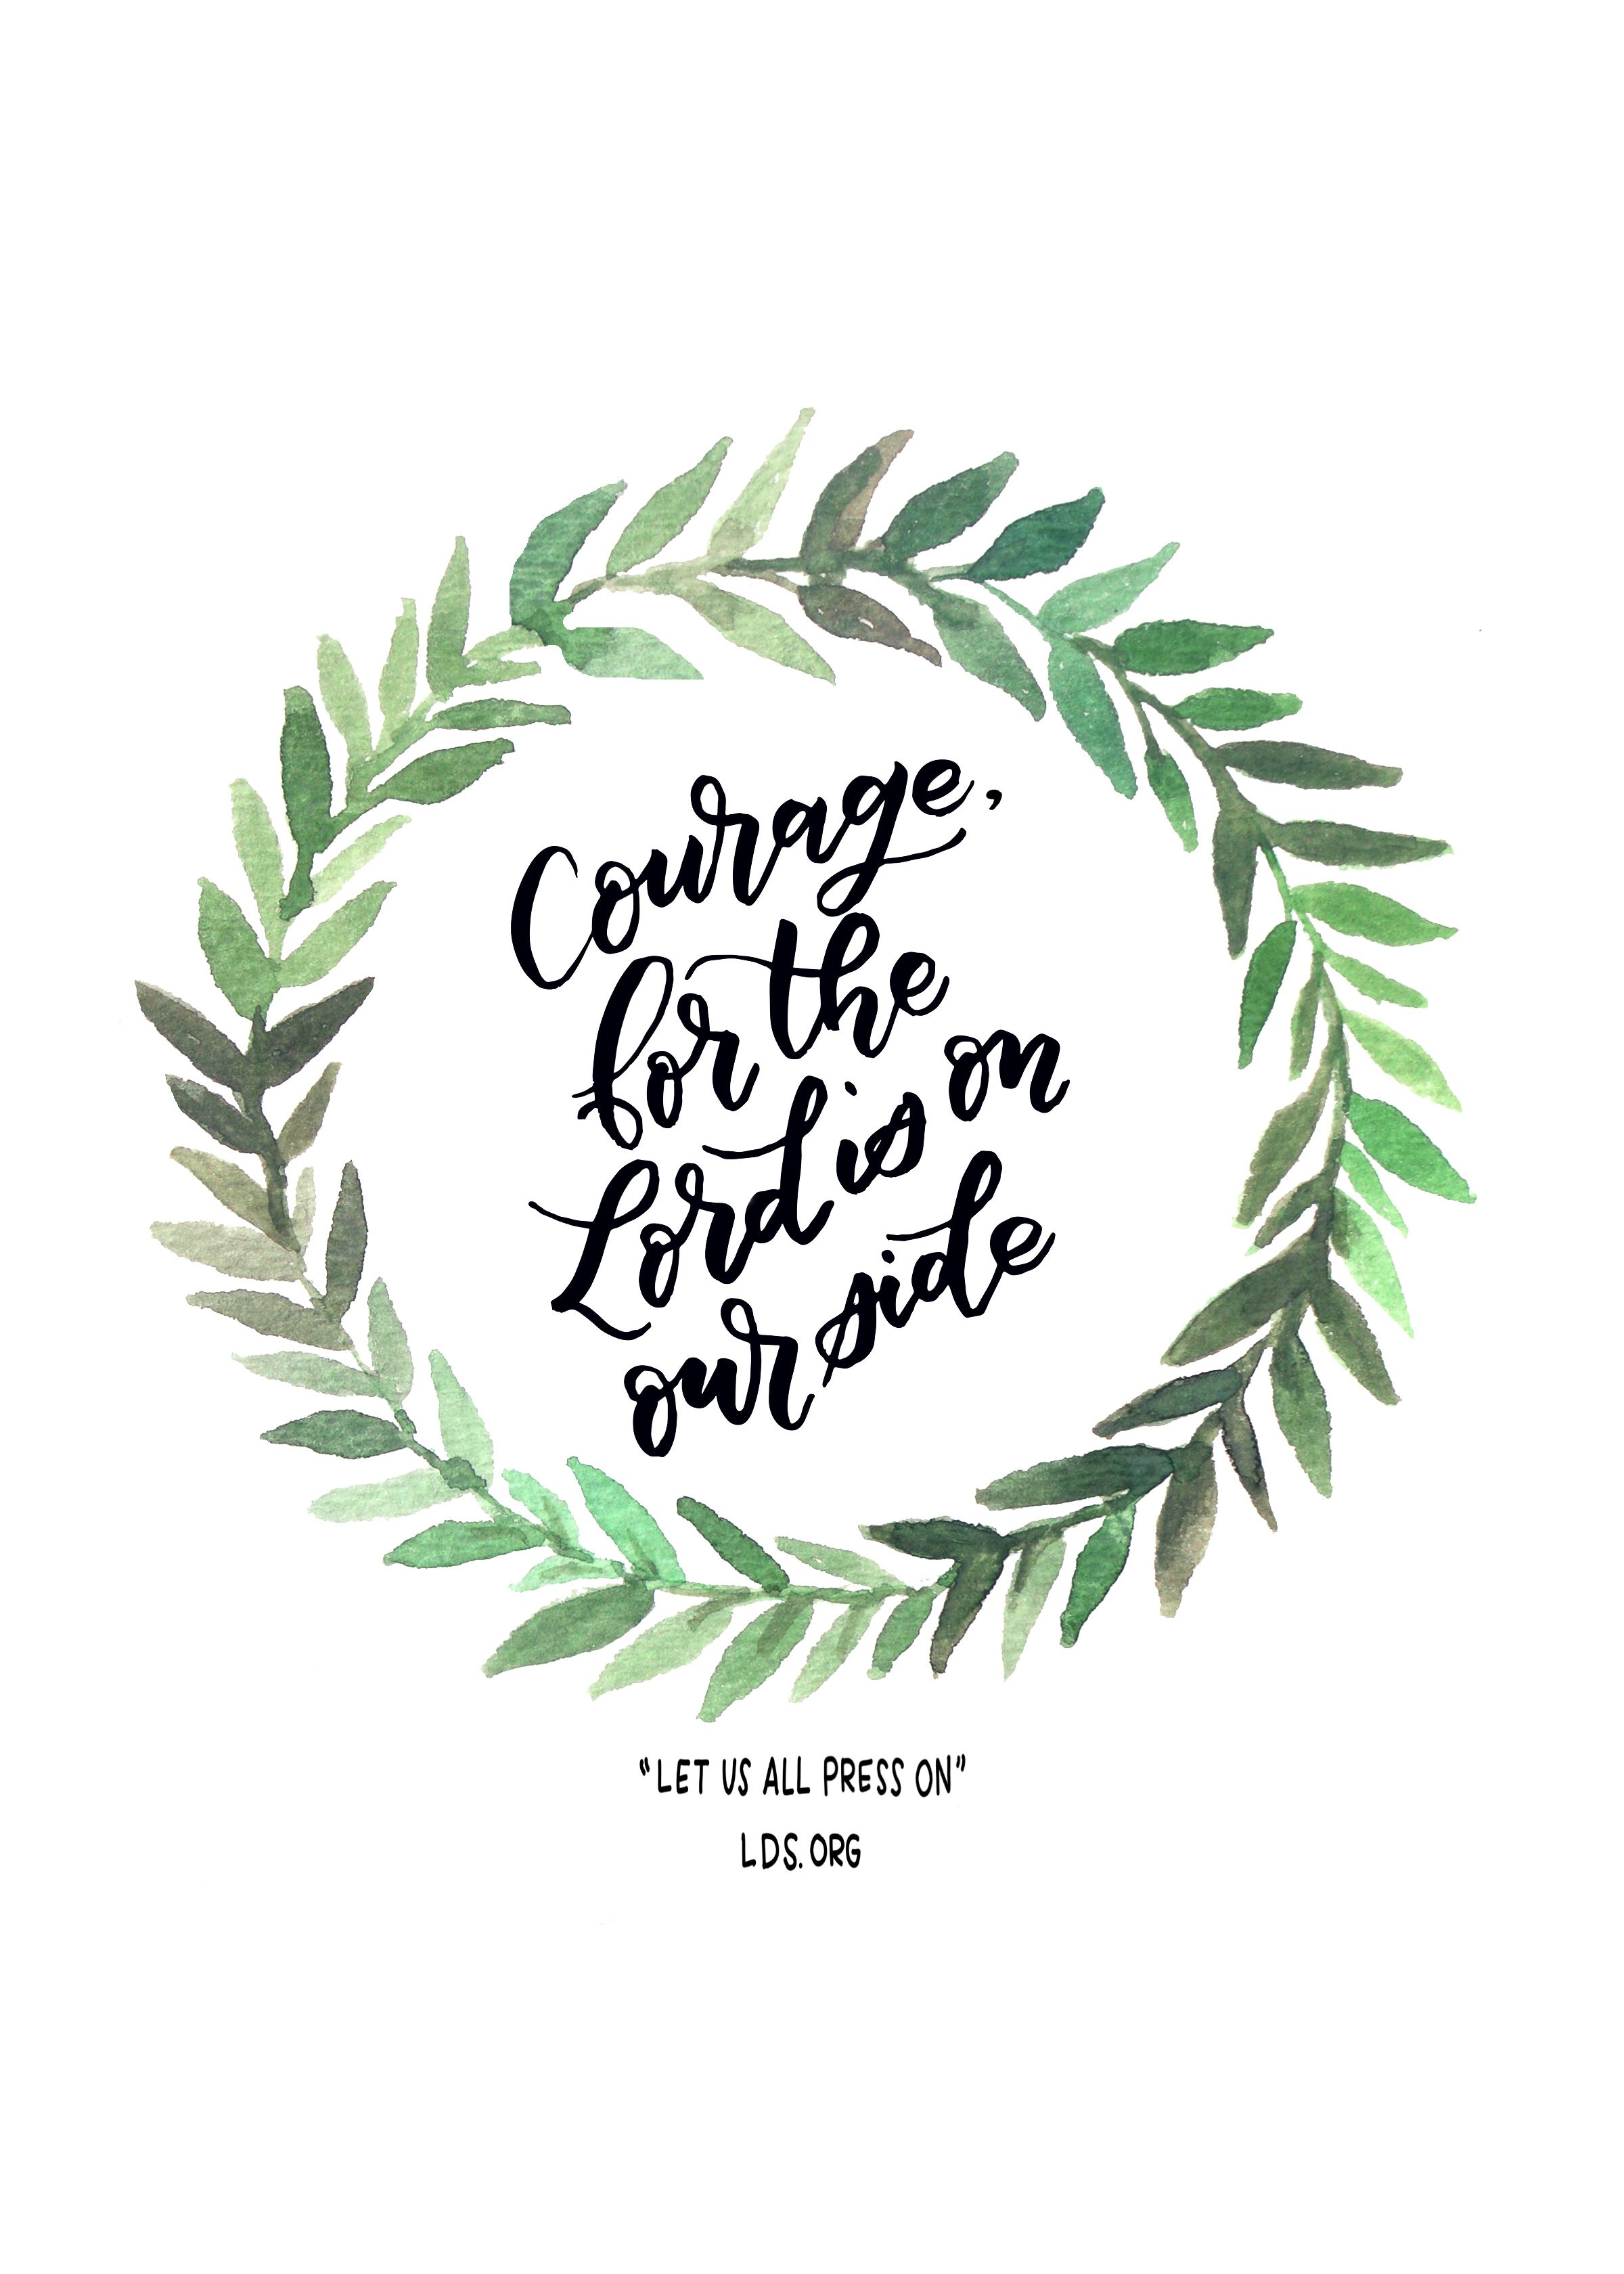 “Courage, for the Lord is on our side.”—“Let Us All Press On” Created by Jenae Nelson.